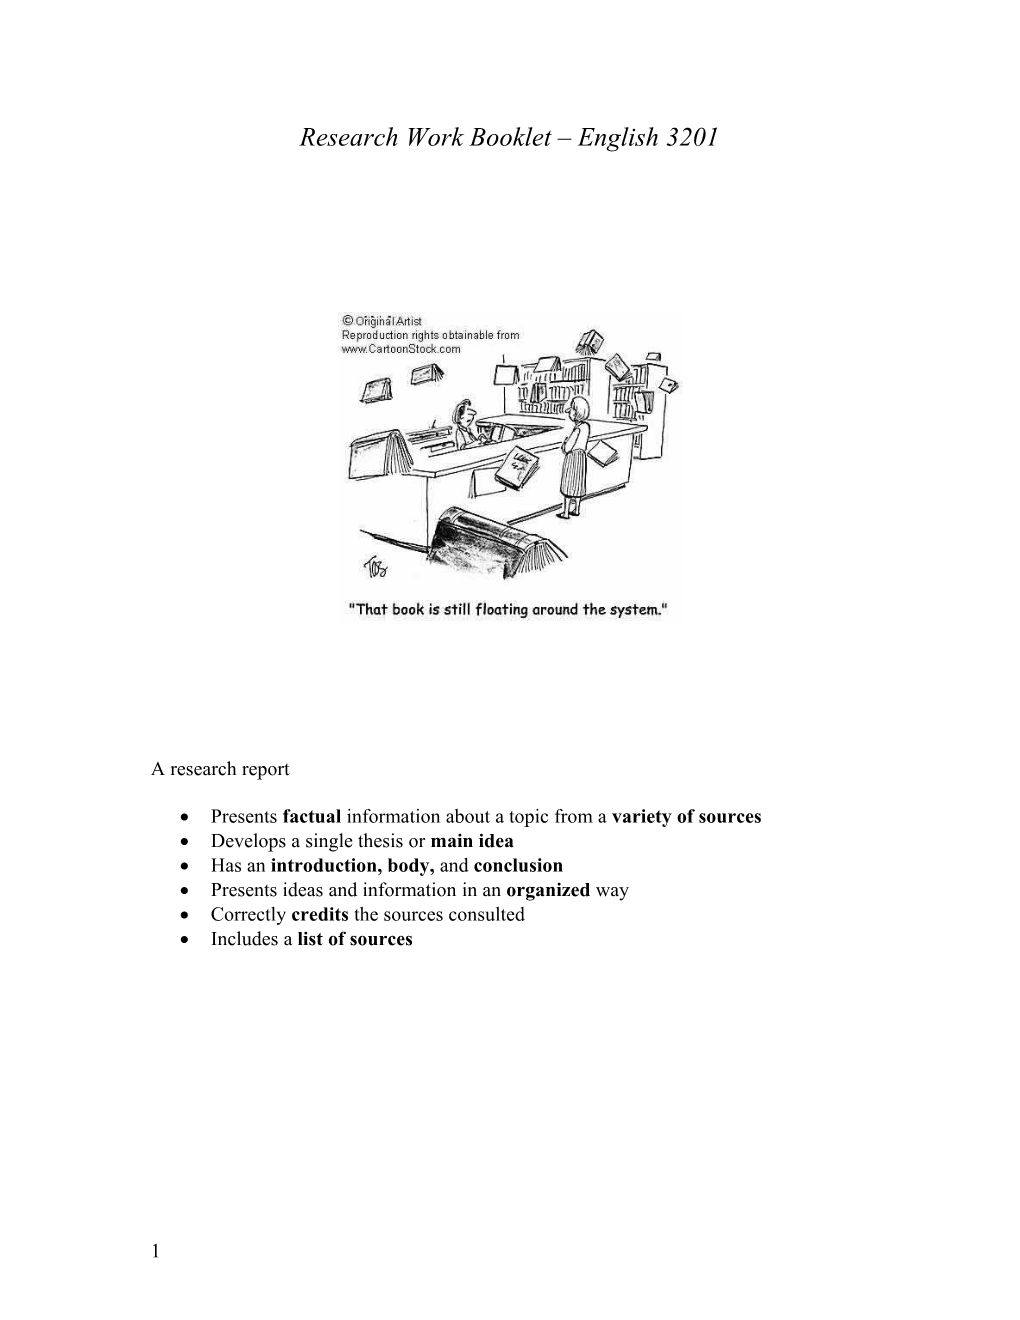 Research Work Booklet English 3201